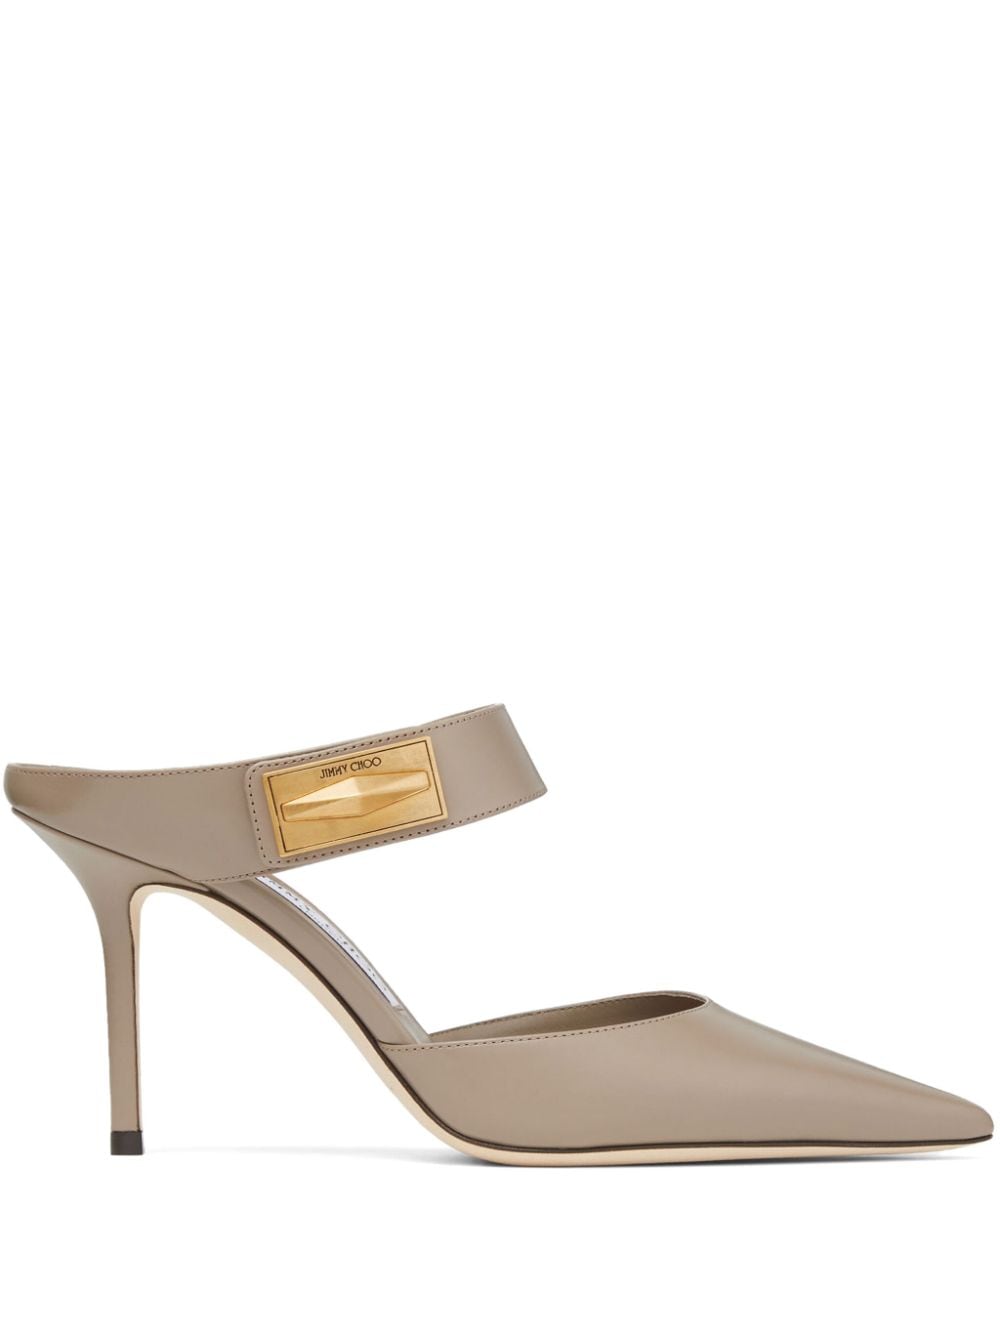 JIMMY CHOO NELL 85MM POINTED-TOE MULES